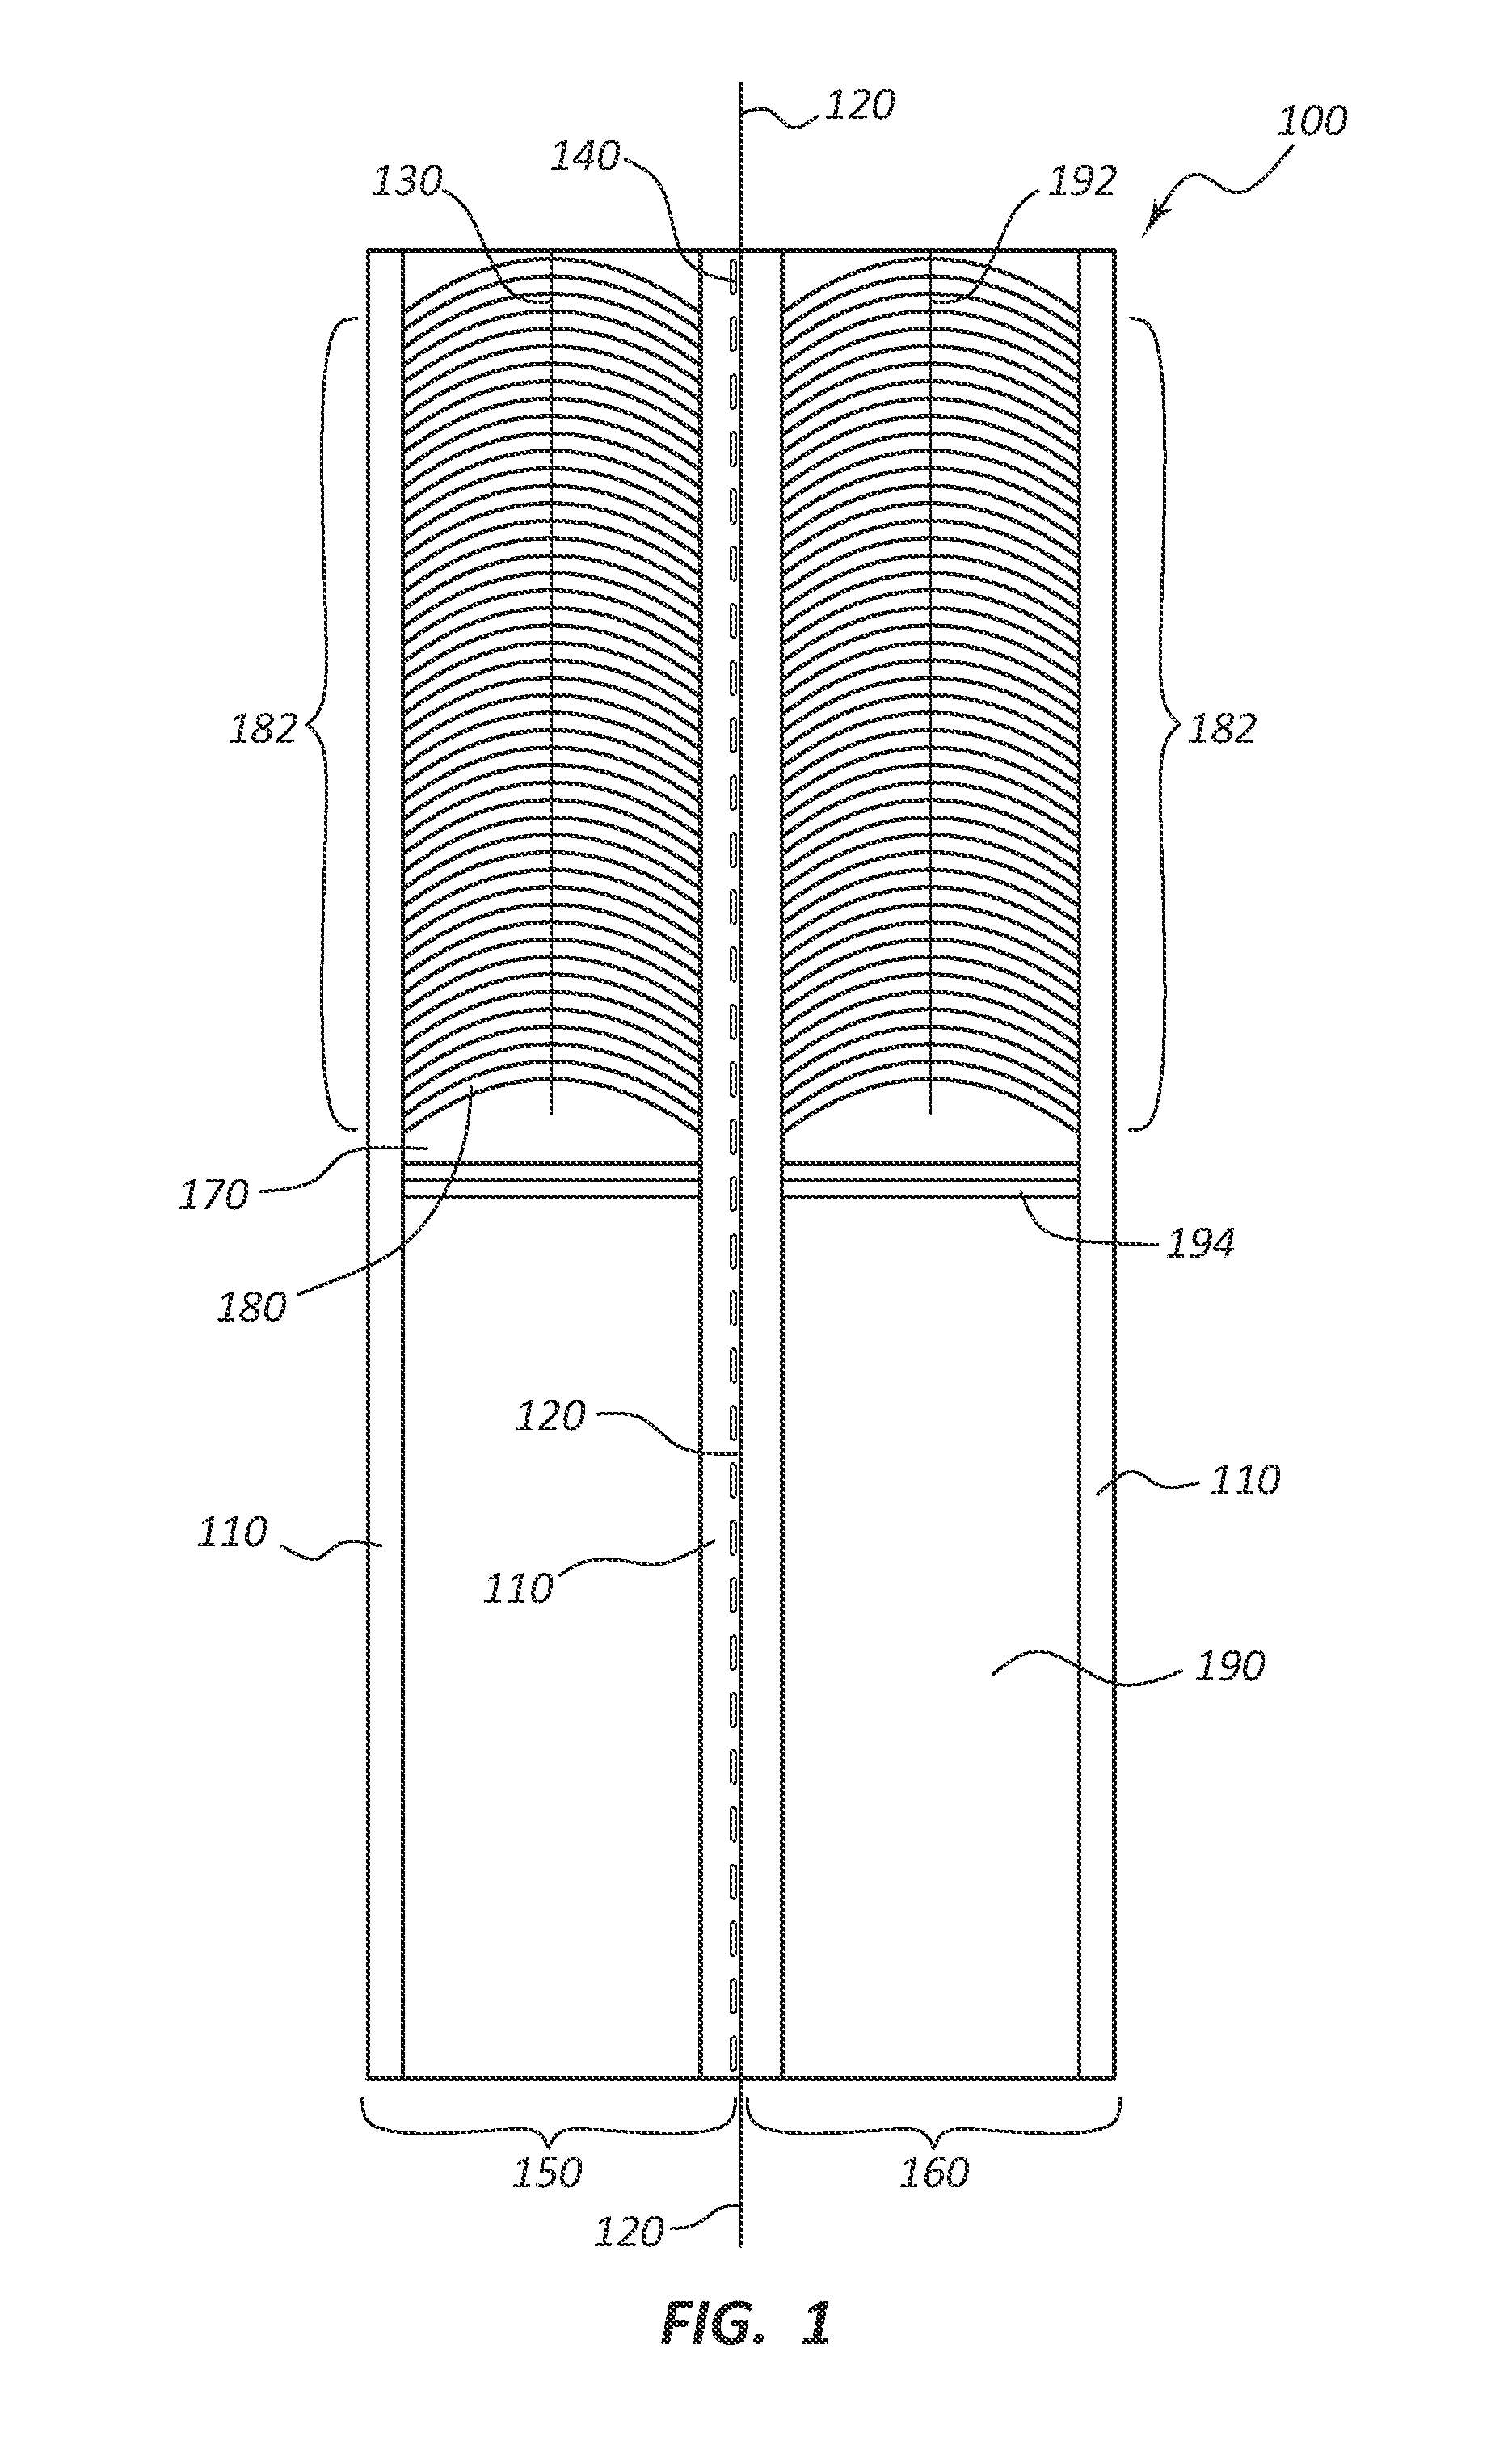 Devices, methods, and systems for dispensing and applying artificial eyelash adhesive and artificial eyelash structures